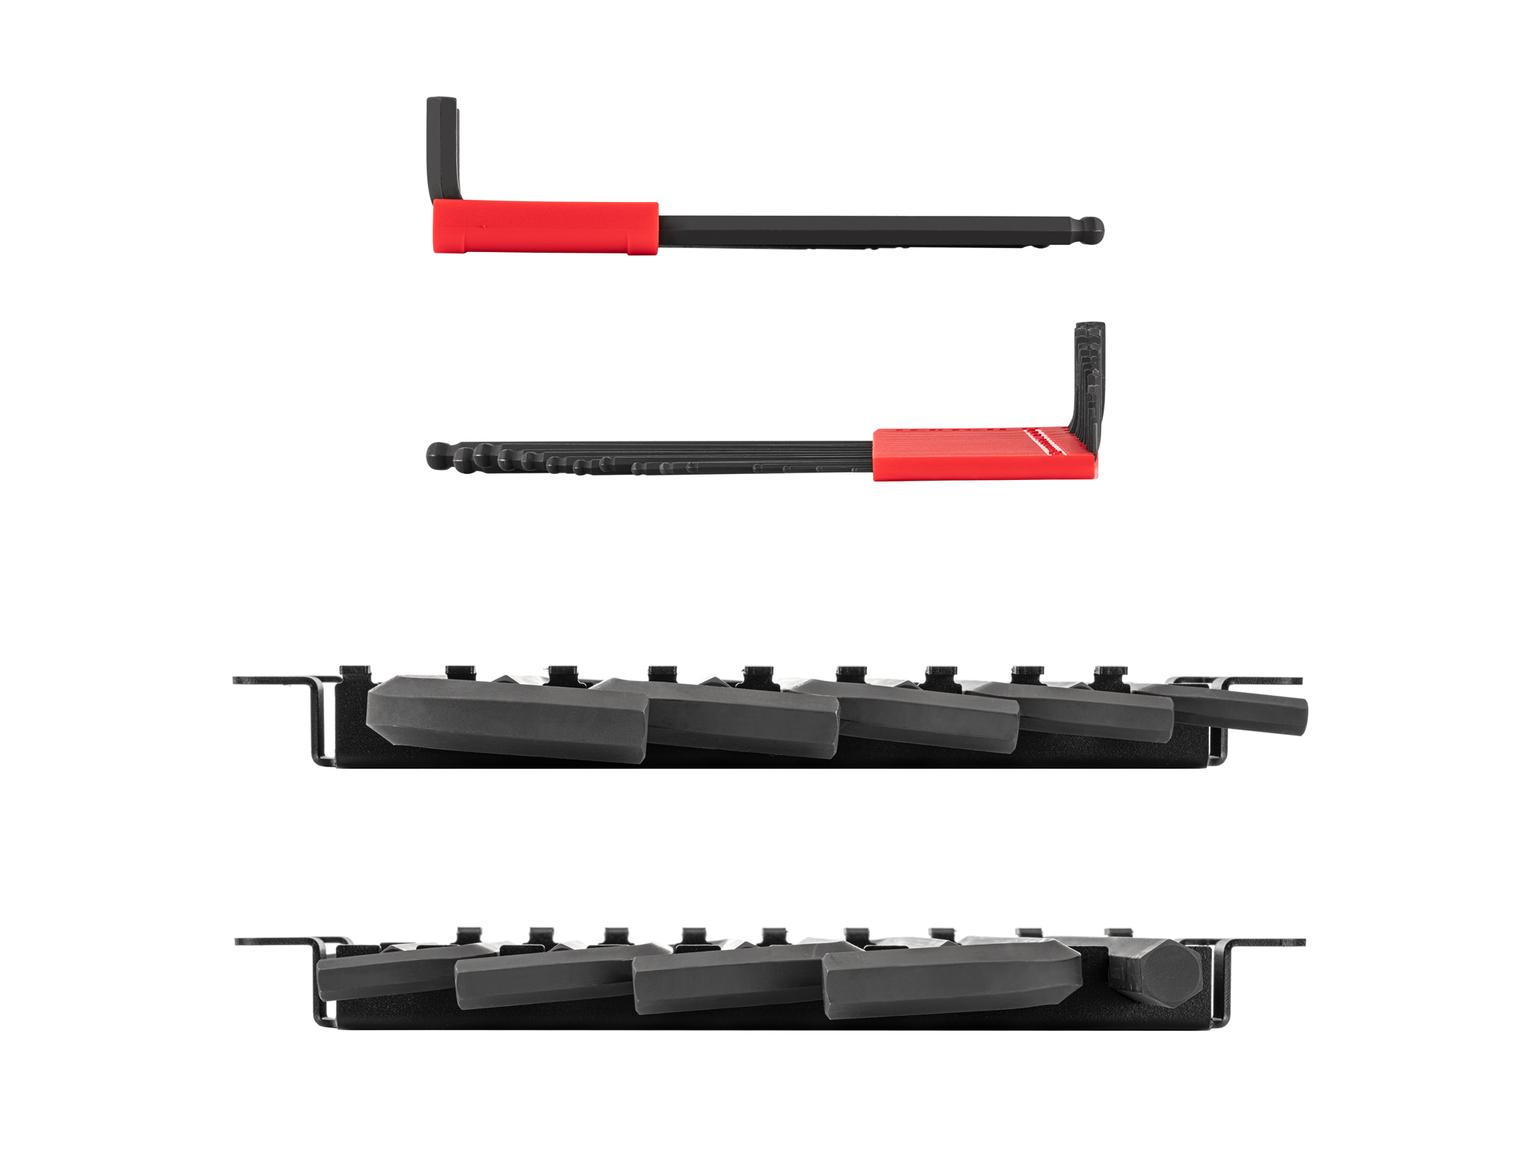 TEKTON KLX99201-T Ball End and Flat End Hex L-Key Set with Holder and Rack, 24-Piece (1.3-19 mm)